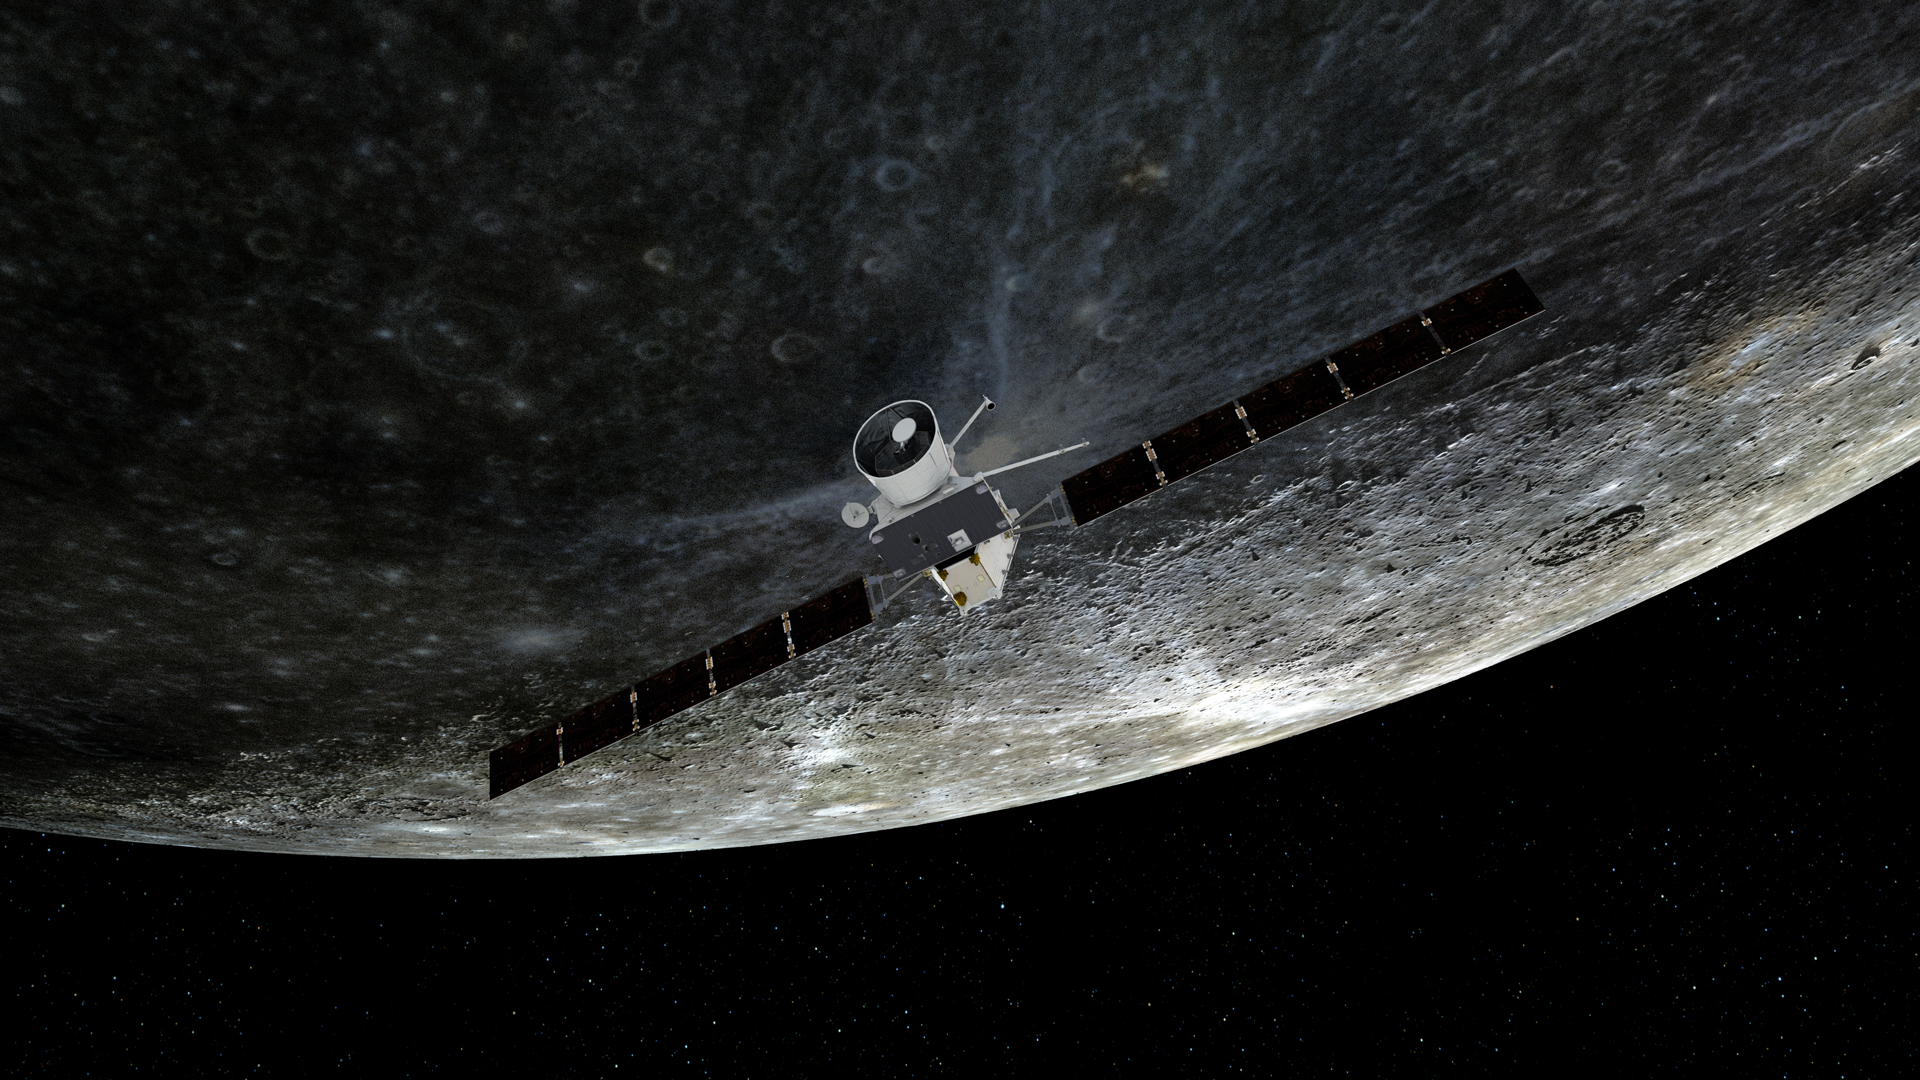 The European/Japanese BepiColombo probe made its second flyby of Mercury on June 23, 2022.